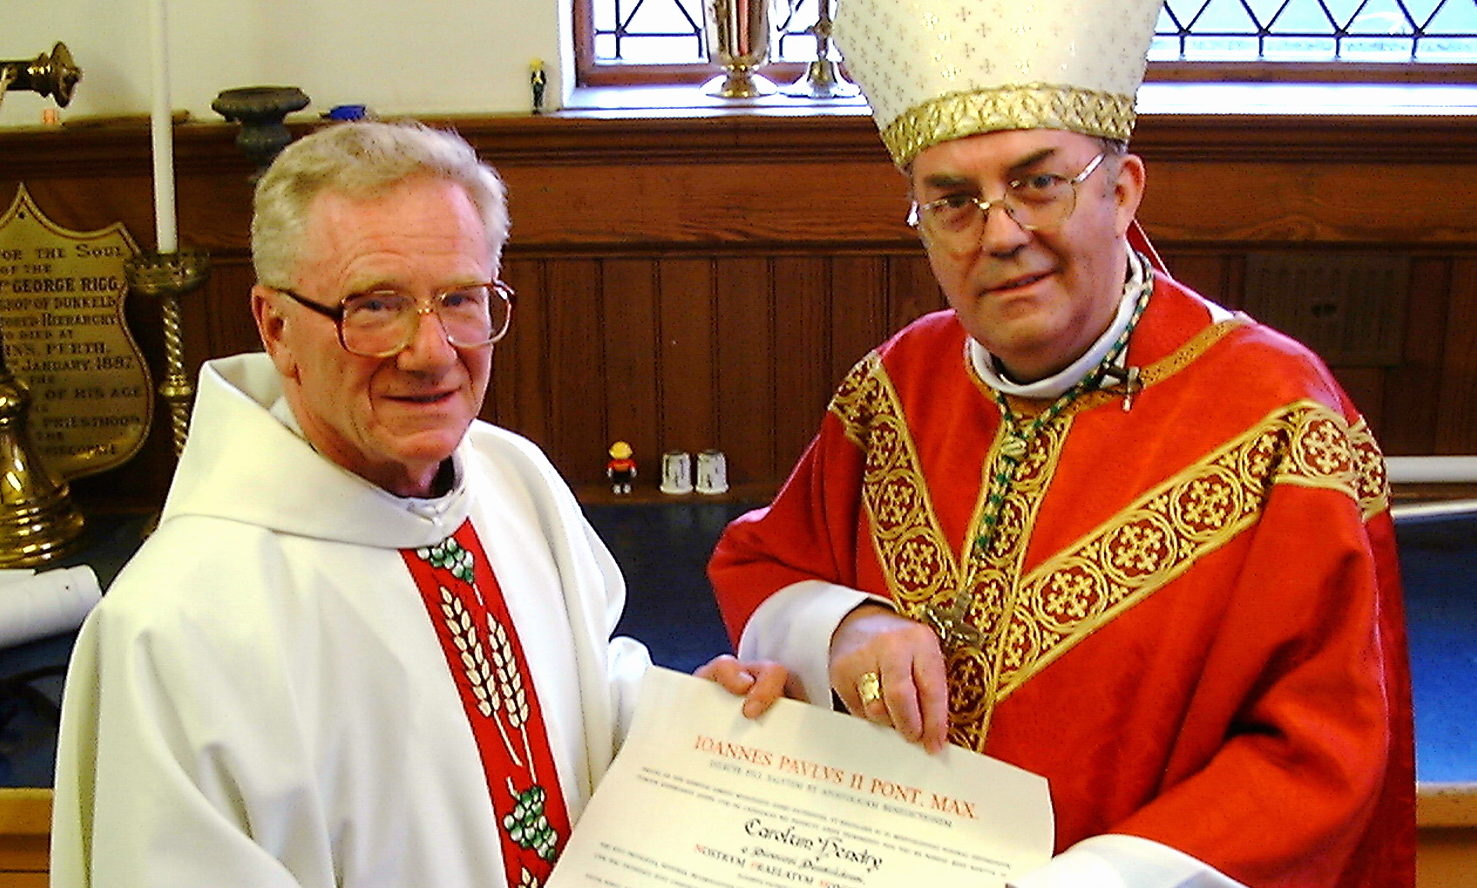 Monsignor Charles Hendry is presented withhis papal honour by Bishop Vincent Logan of Dunkeld in 2003.